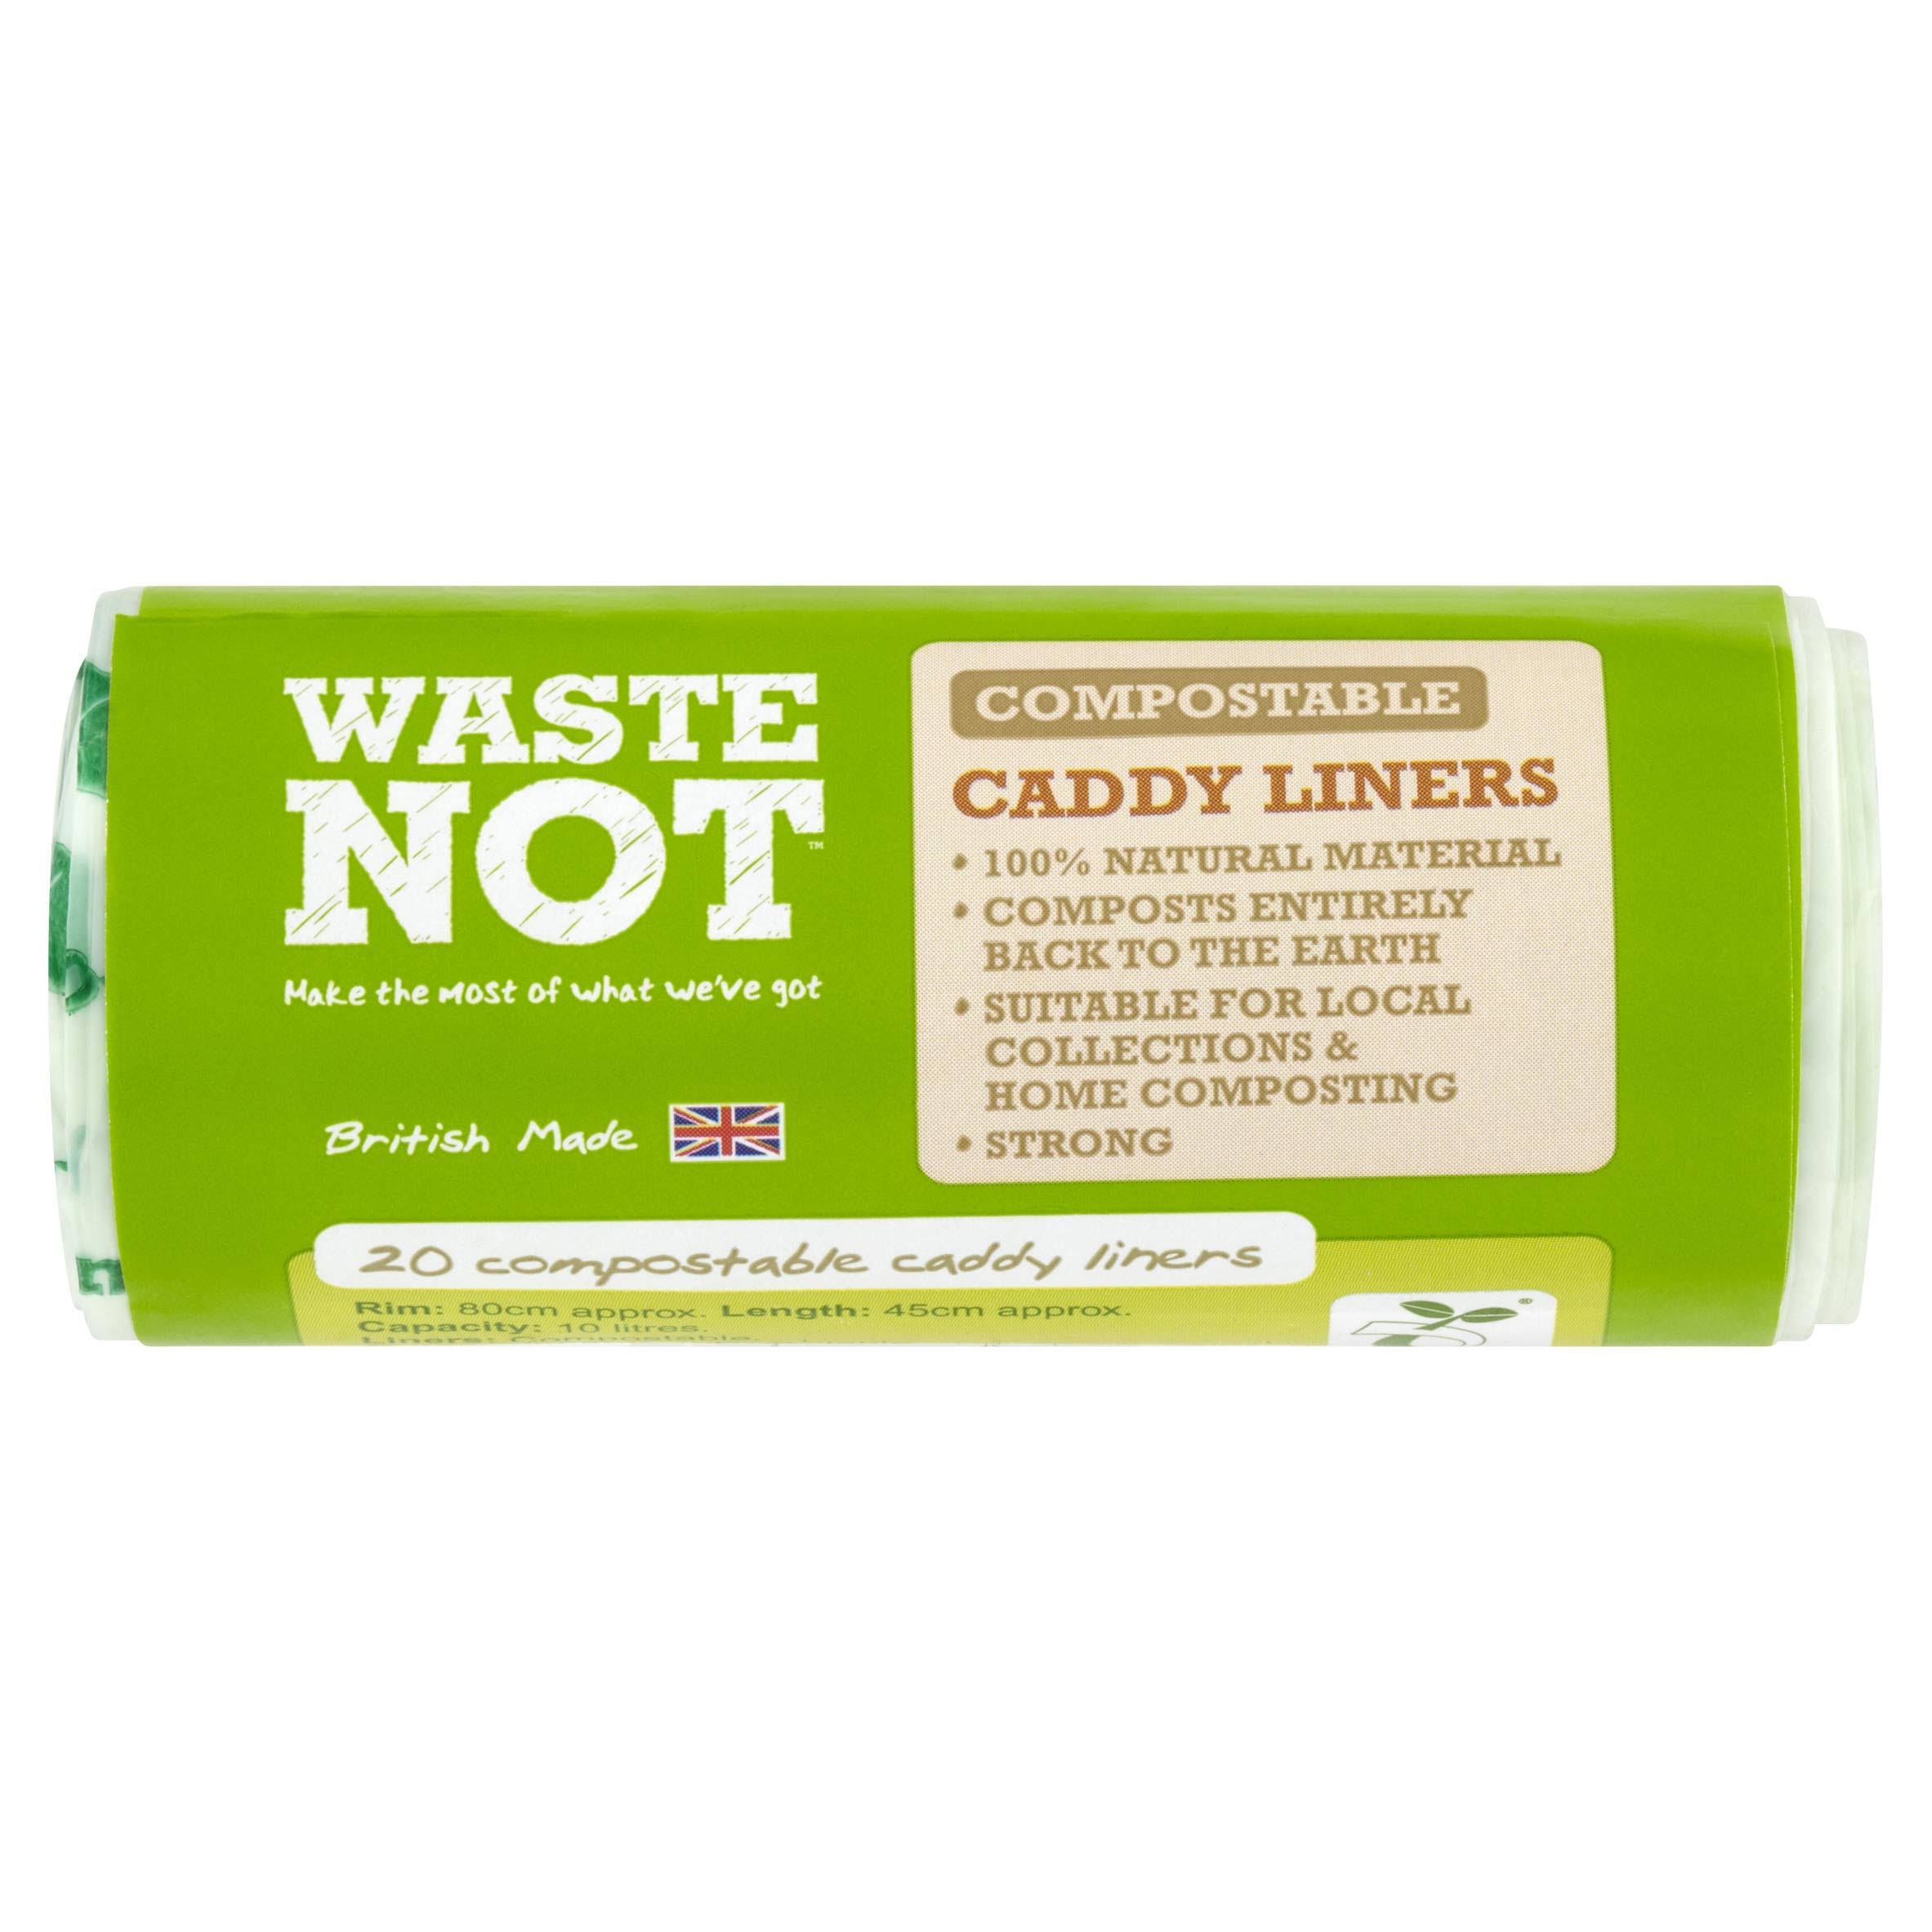 Waste Not Compostable Caddy Liners - 20pcs